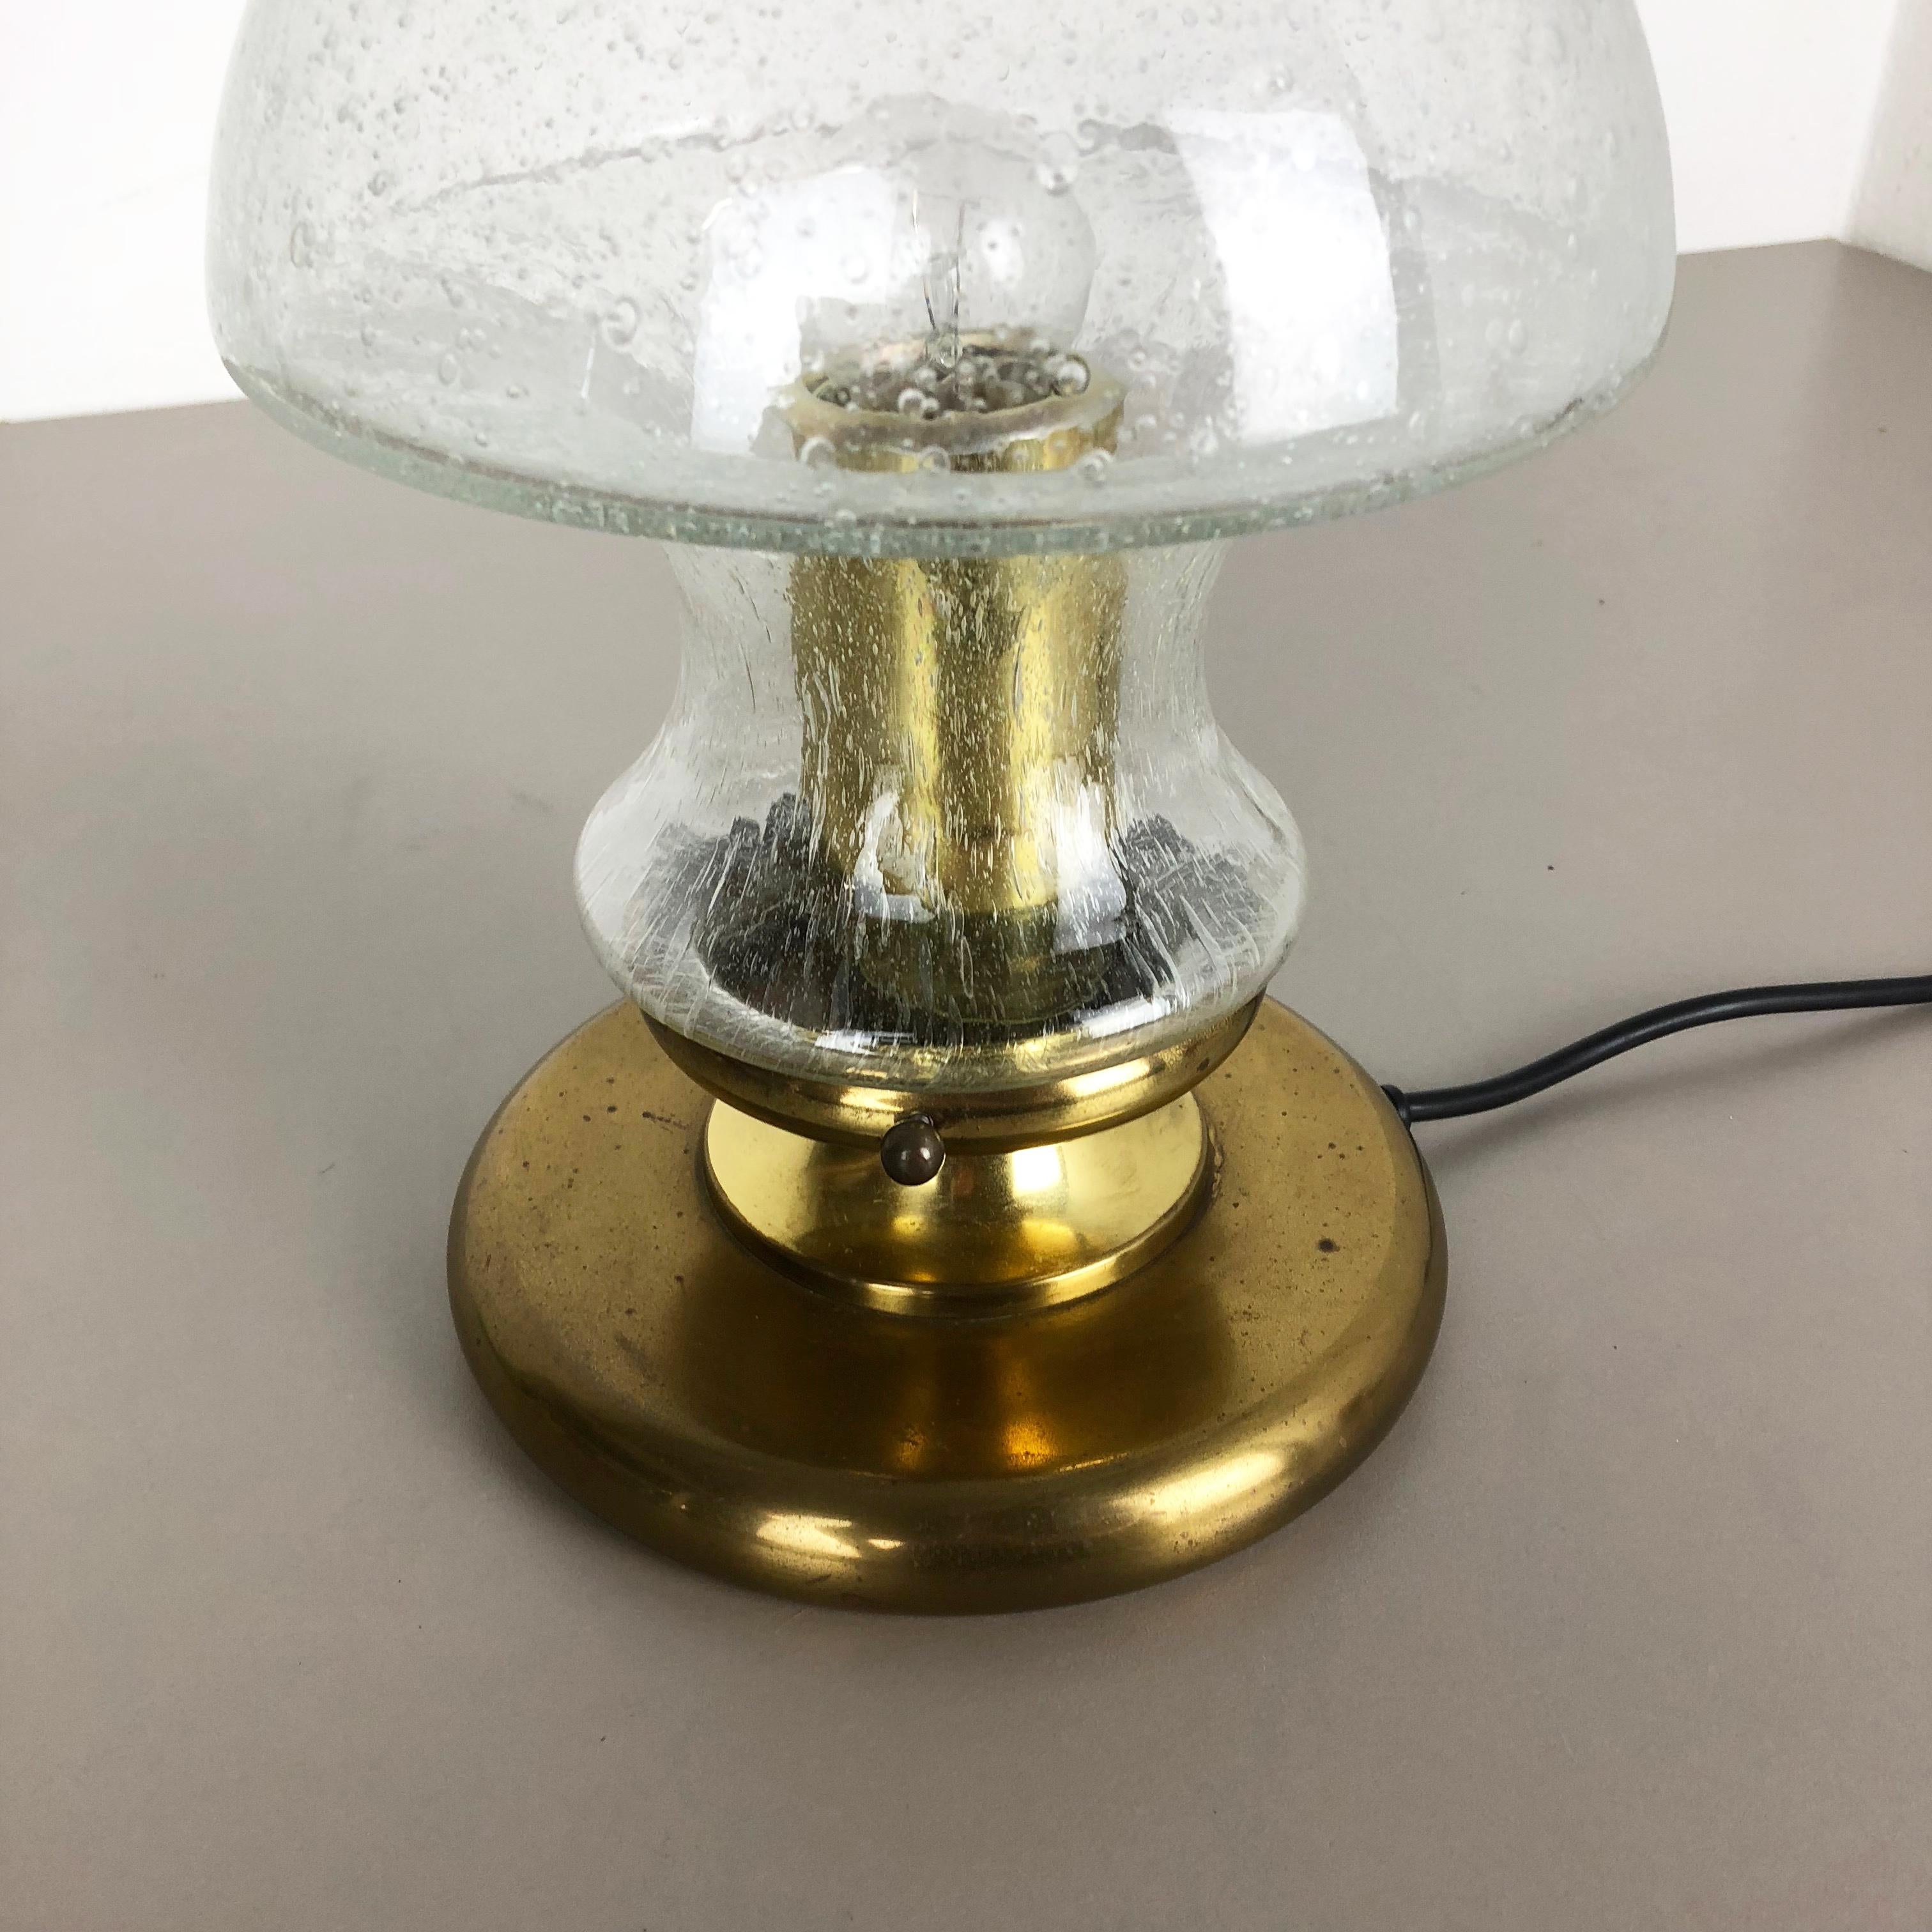 Modernist Glass and Brass Mushroom Table Light by Doria Lights, 1970s, Germany For Sale 4